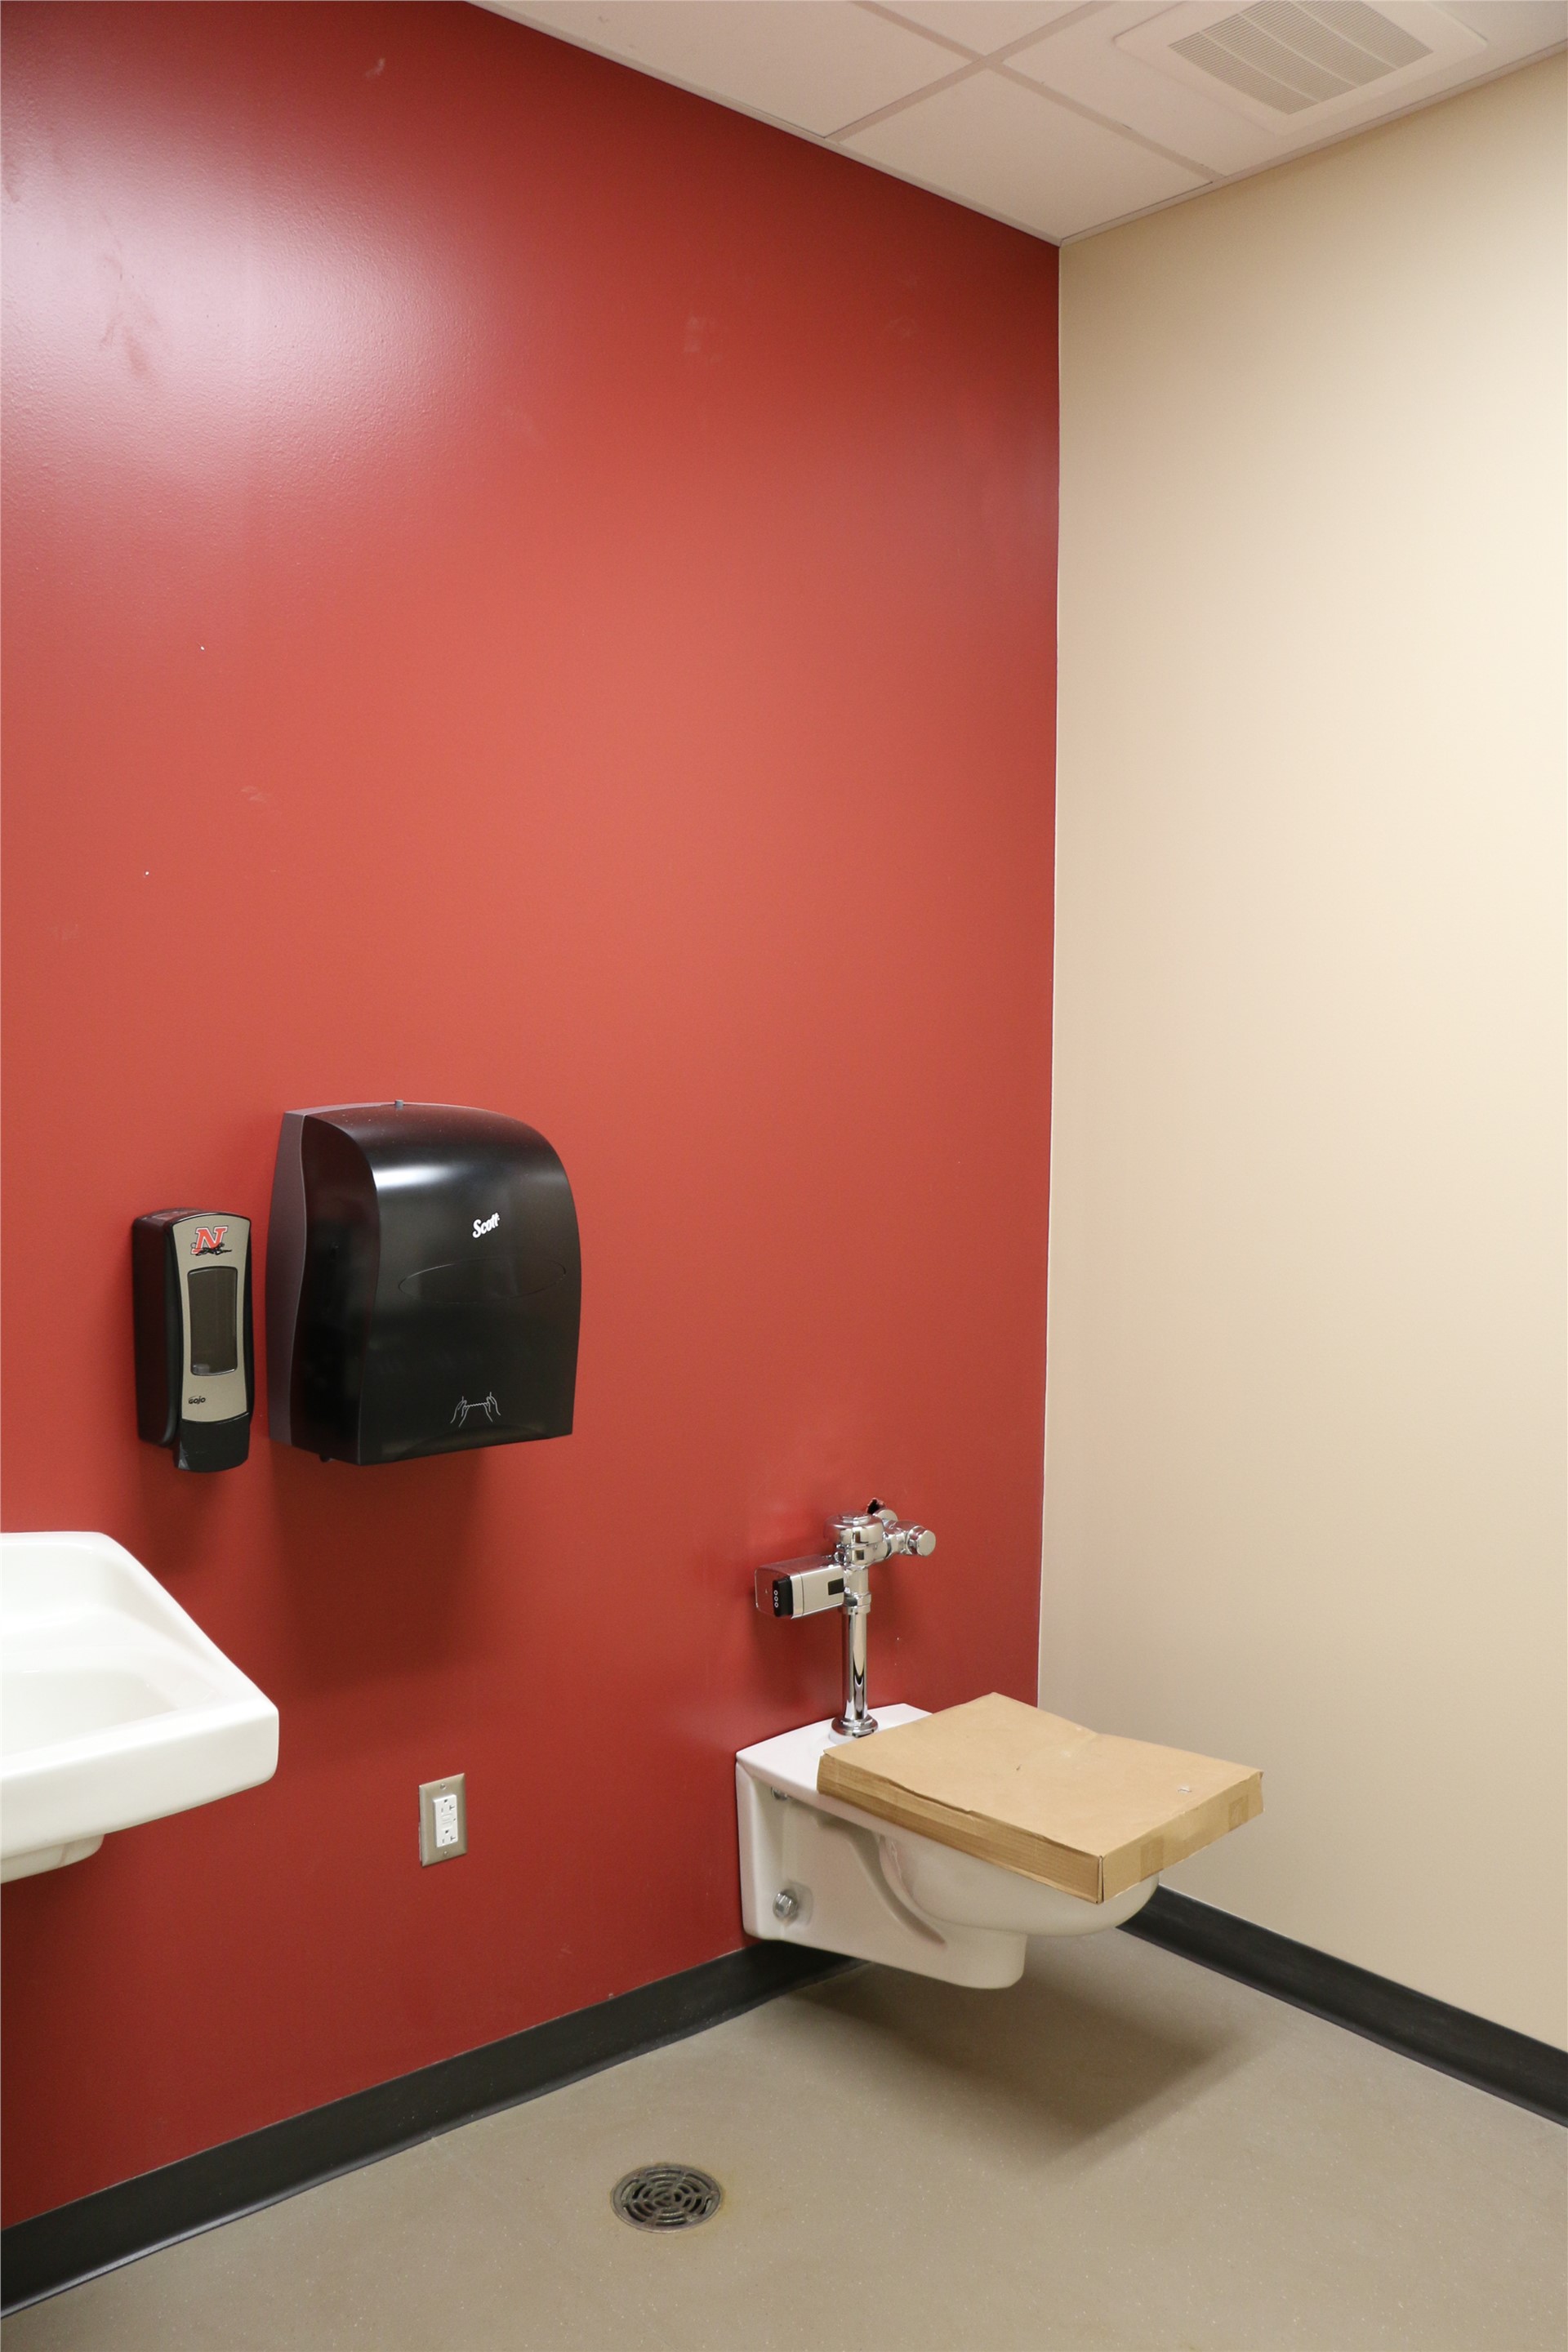 Faculty Restroom (within the Faculty Prep Room)